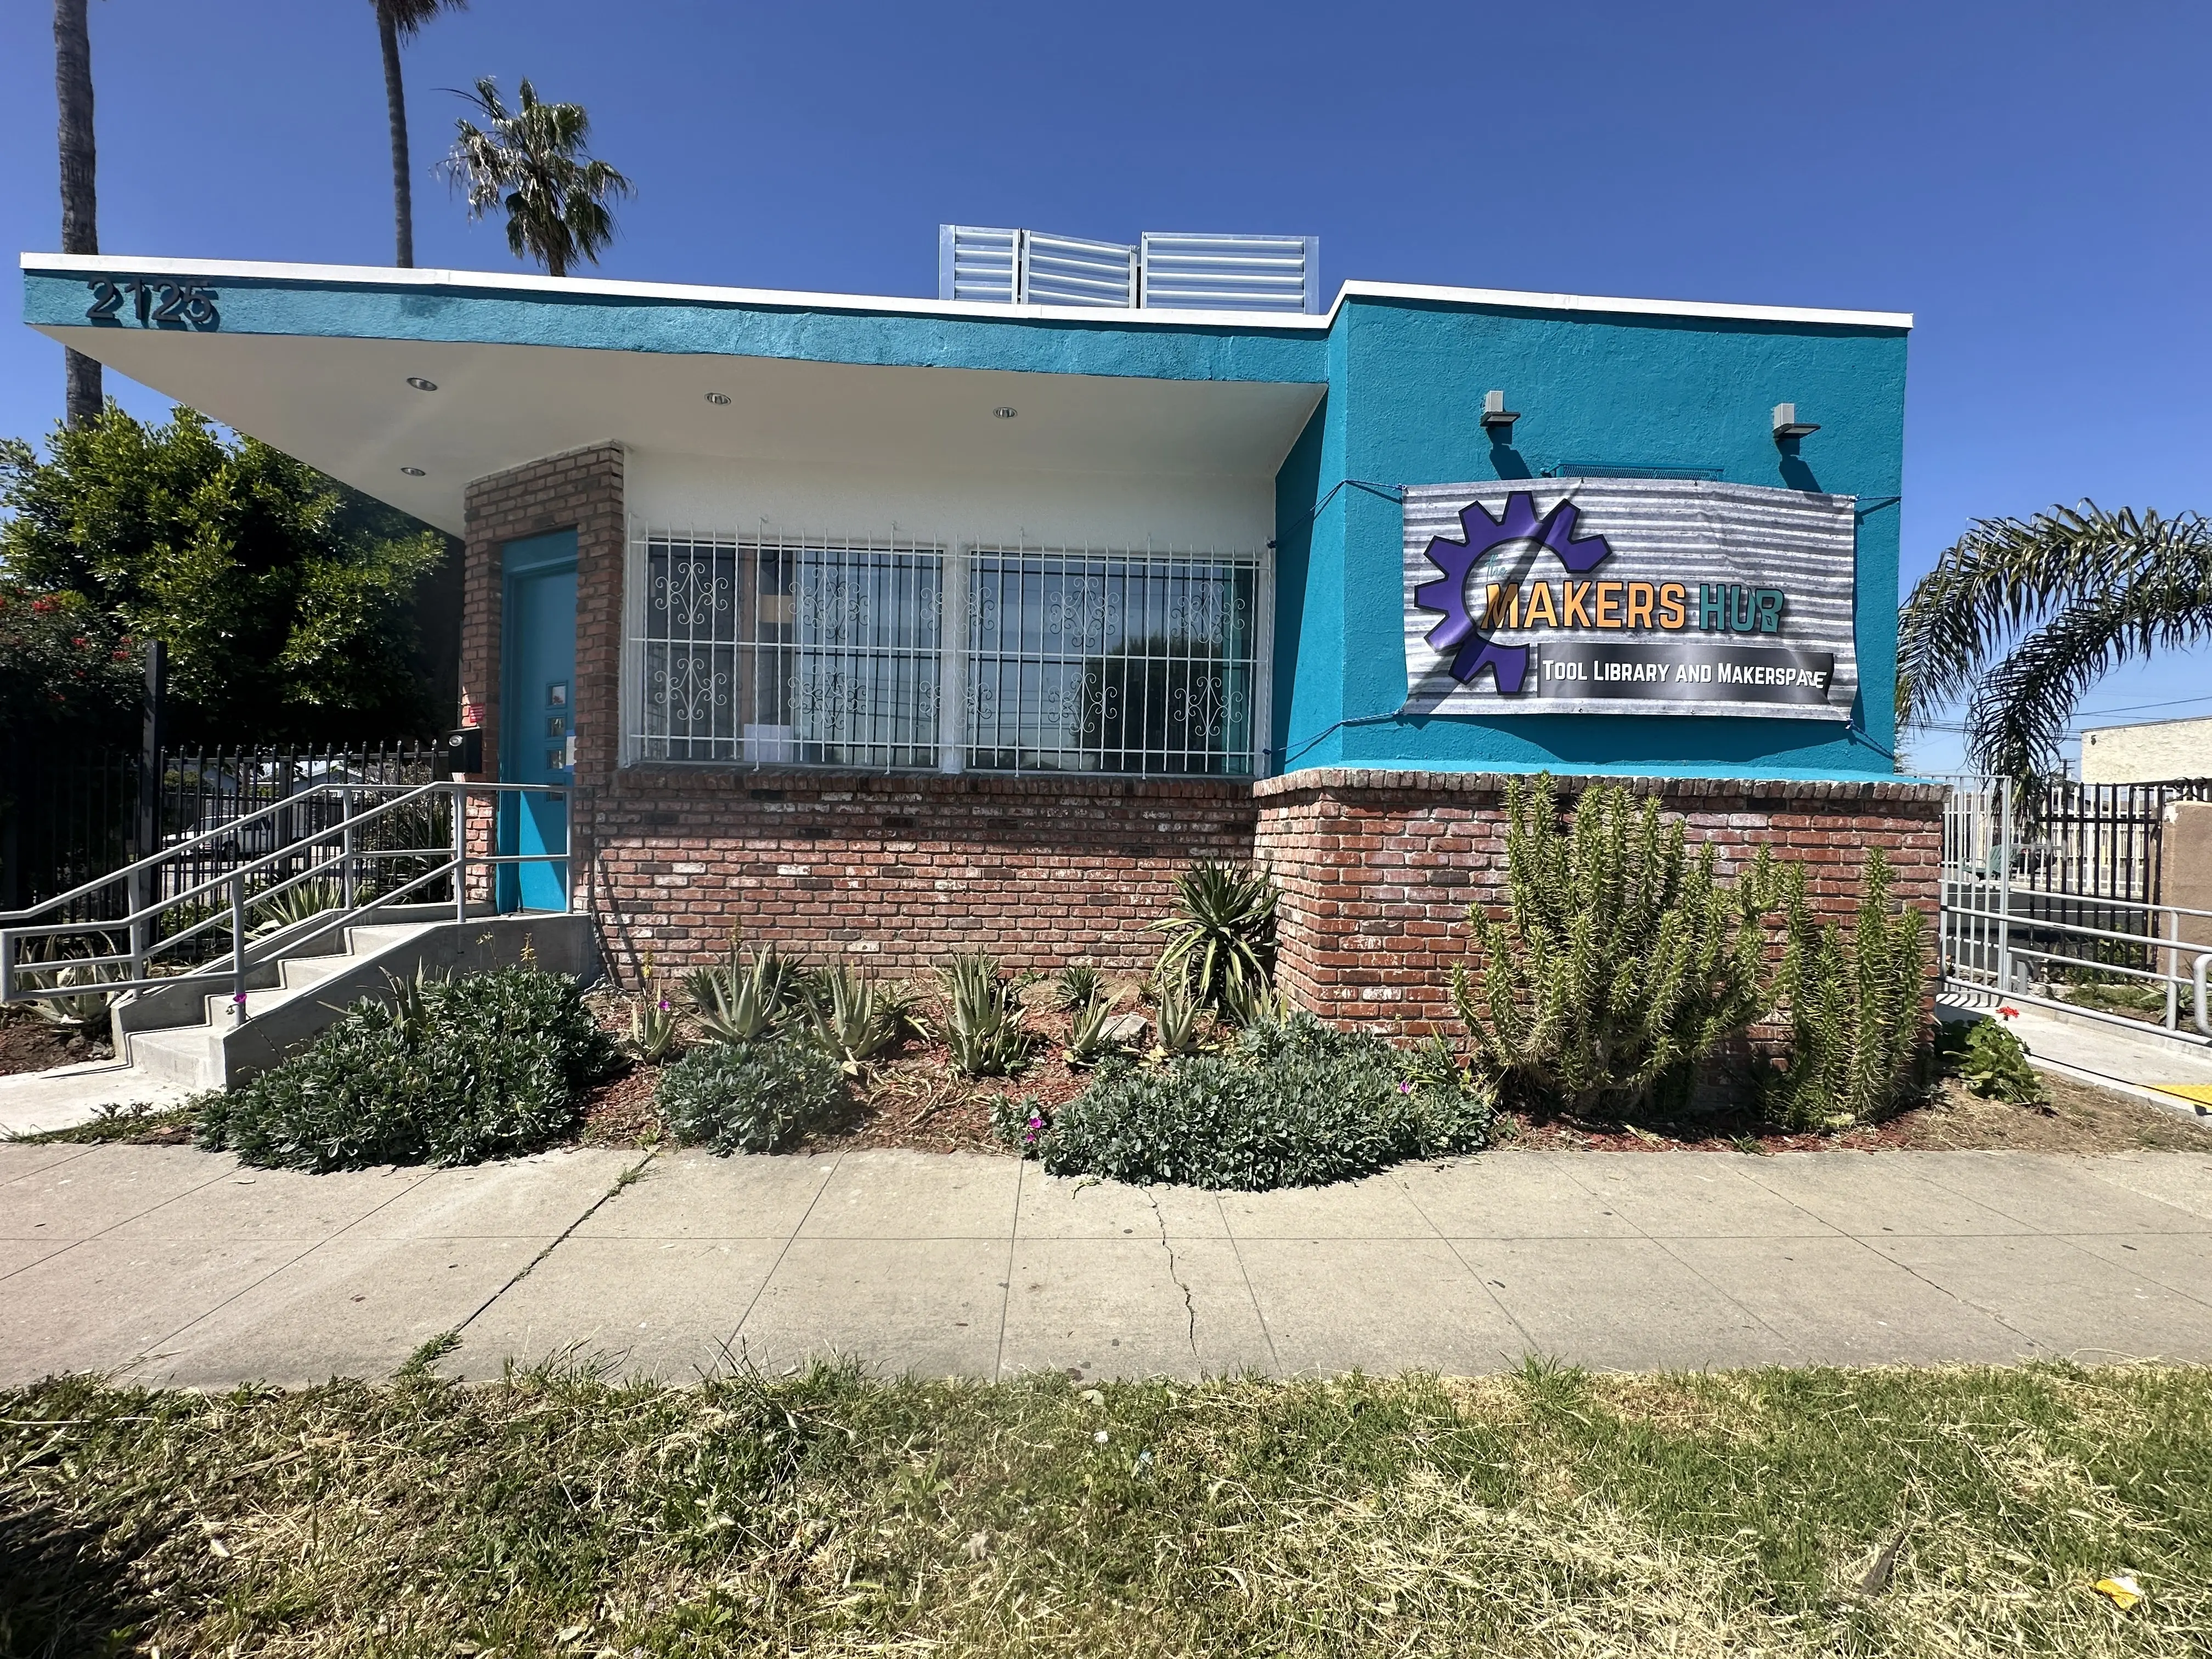 NEW Tool Library in Compton, CA! Be part of getting the  place set up to open!!!